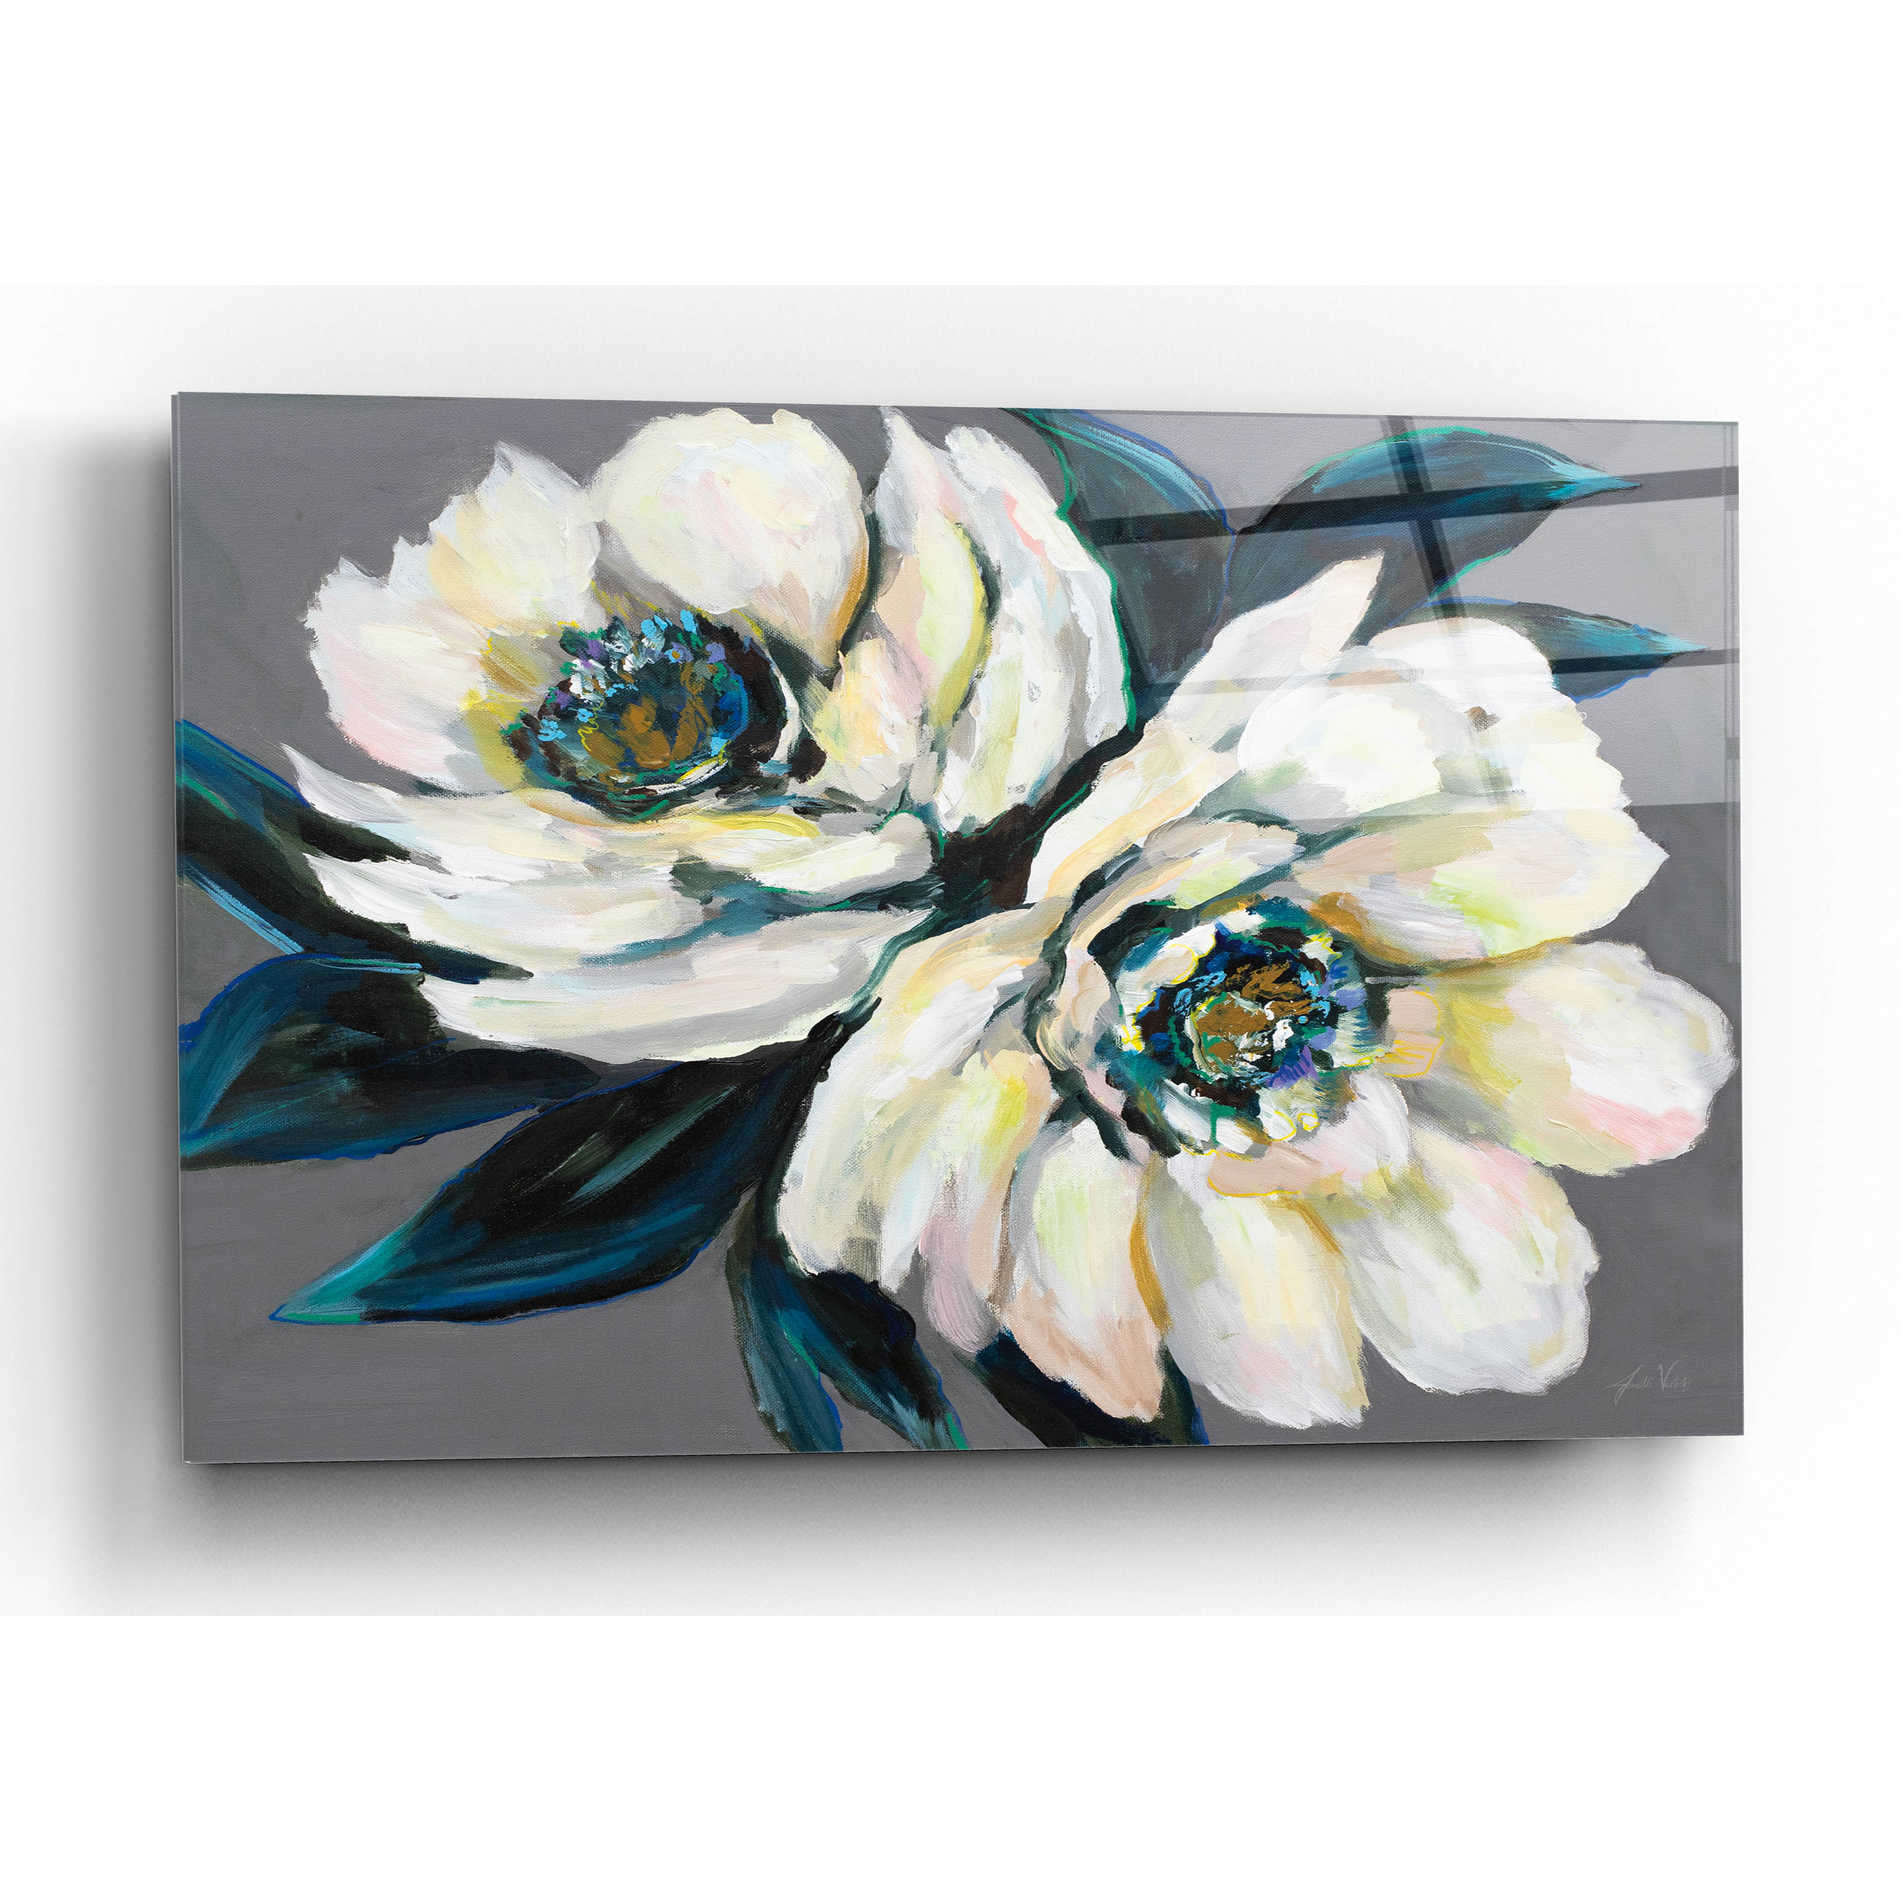 Epic Art 'Peonies' by Jeanette Vertentes, Acrylic Glass Wall Art,16x12